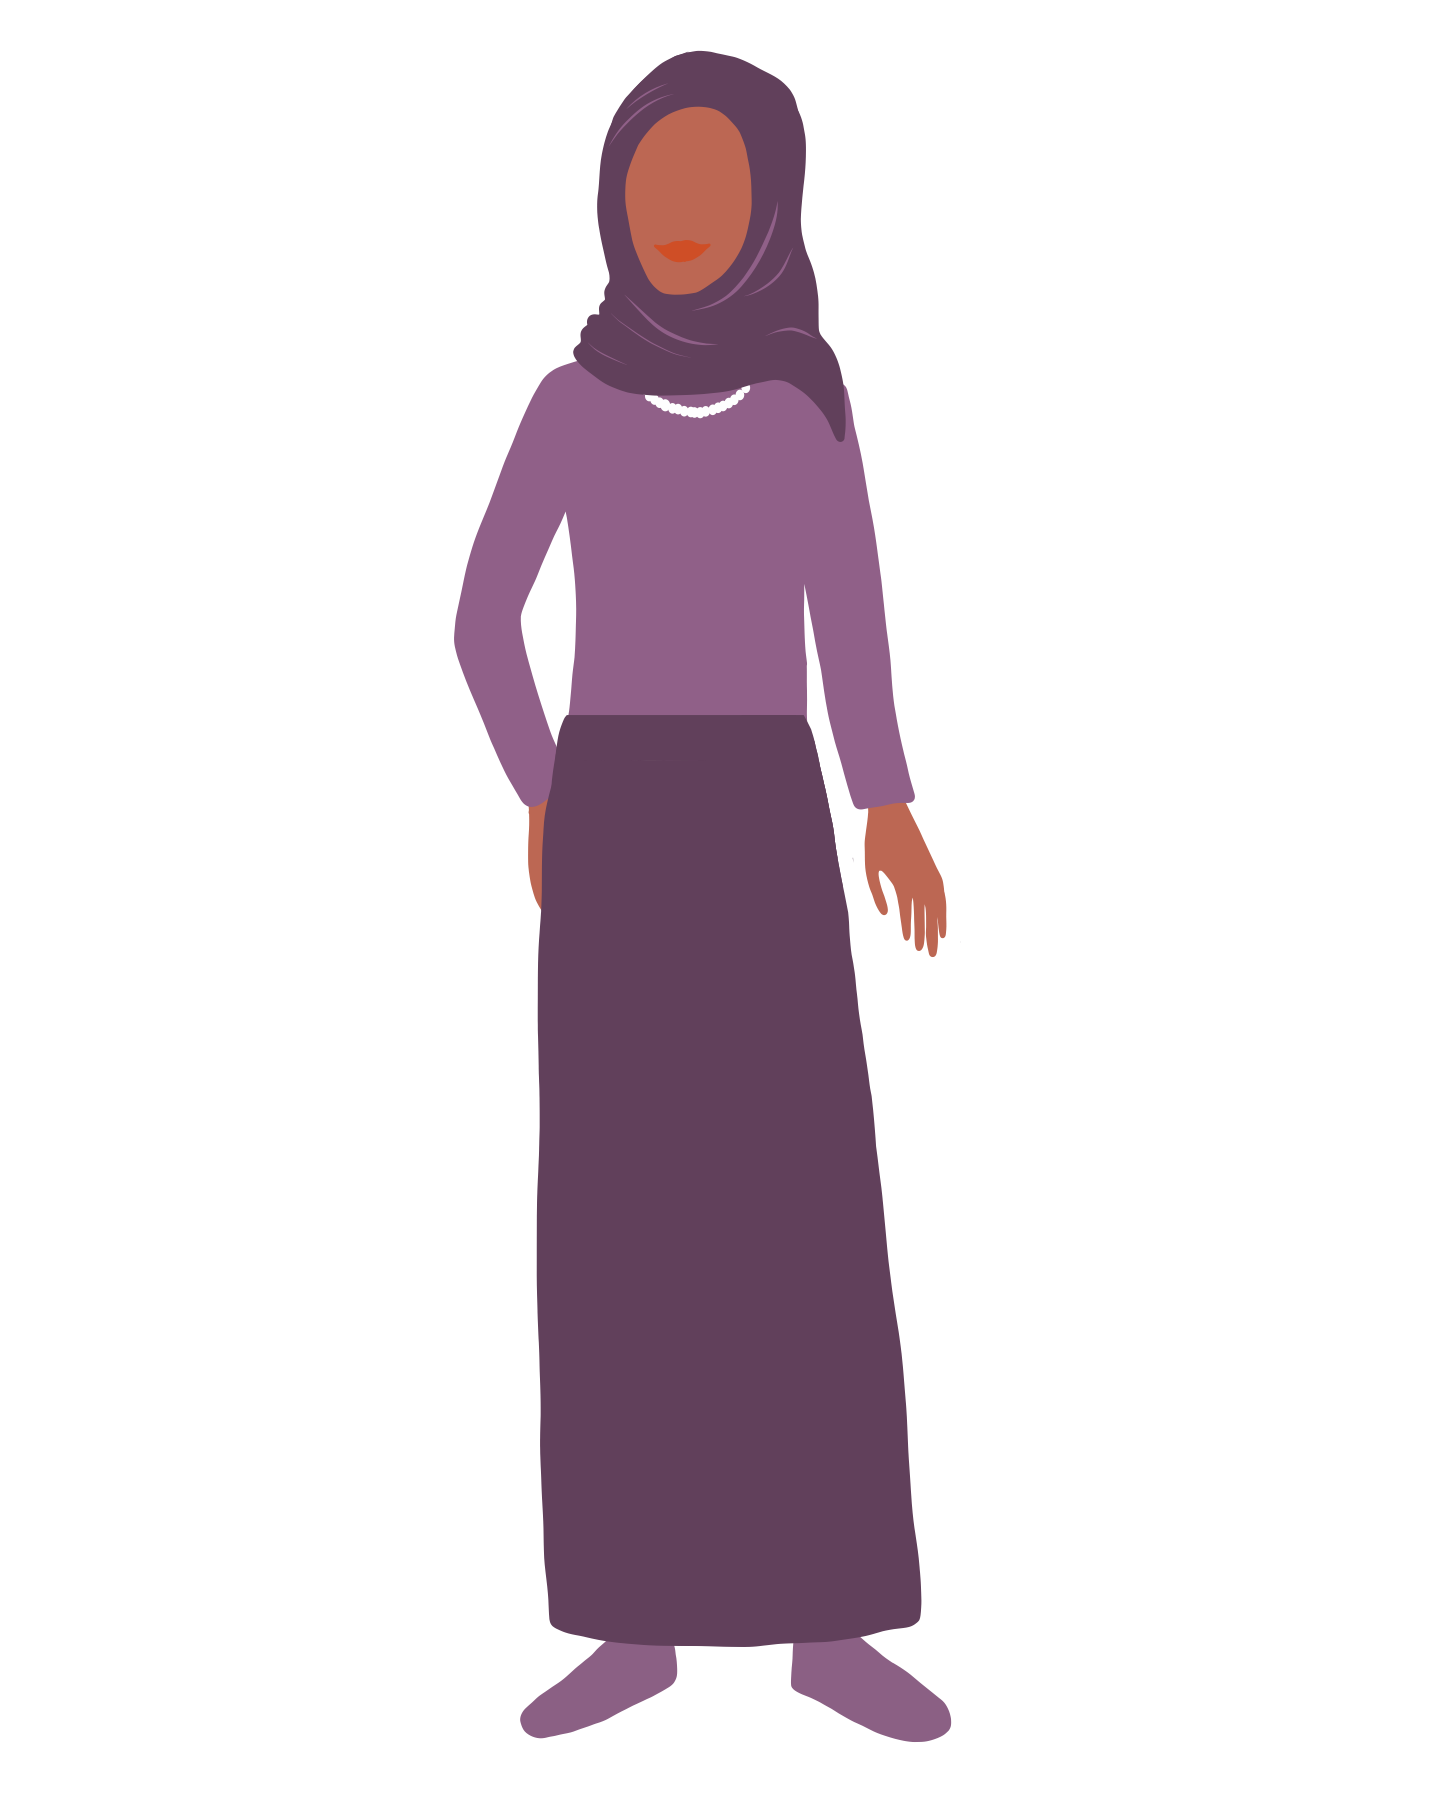 An illustration of a woman standing.